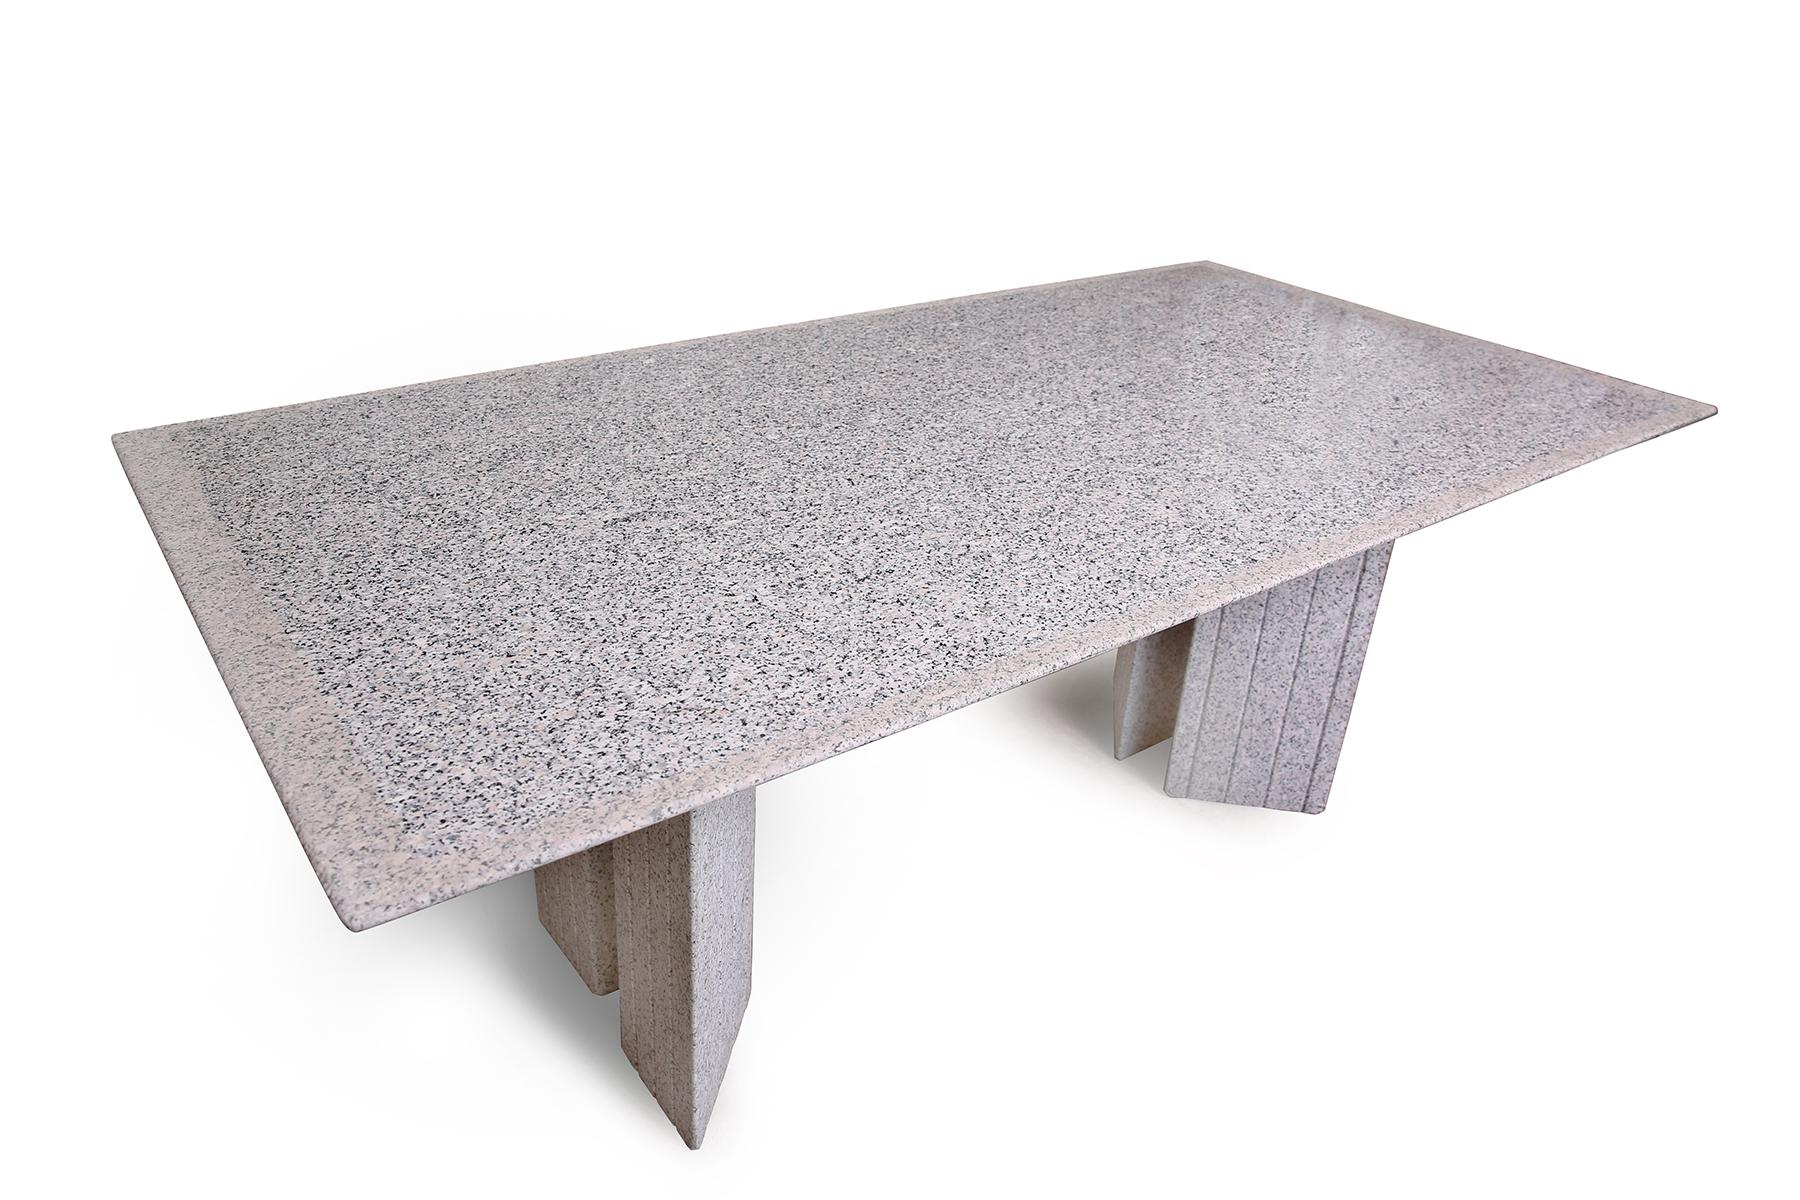 Enrico Baleri for Knoll Studio mega table, circa early 1980s. This table's form was meant to evoke ancient megaliths and is done in polished and honed Sardinian Beta granite. This piece was purchased from a Knoll VP and is in excellent original